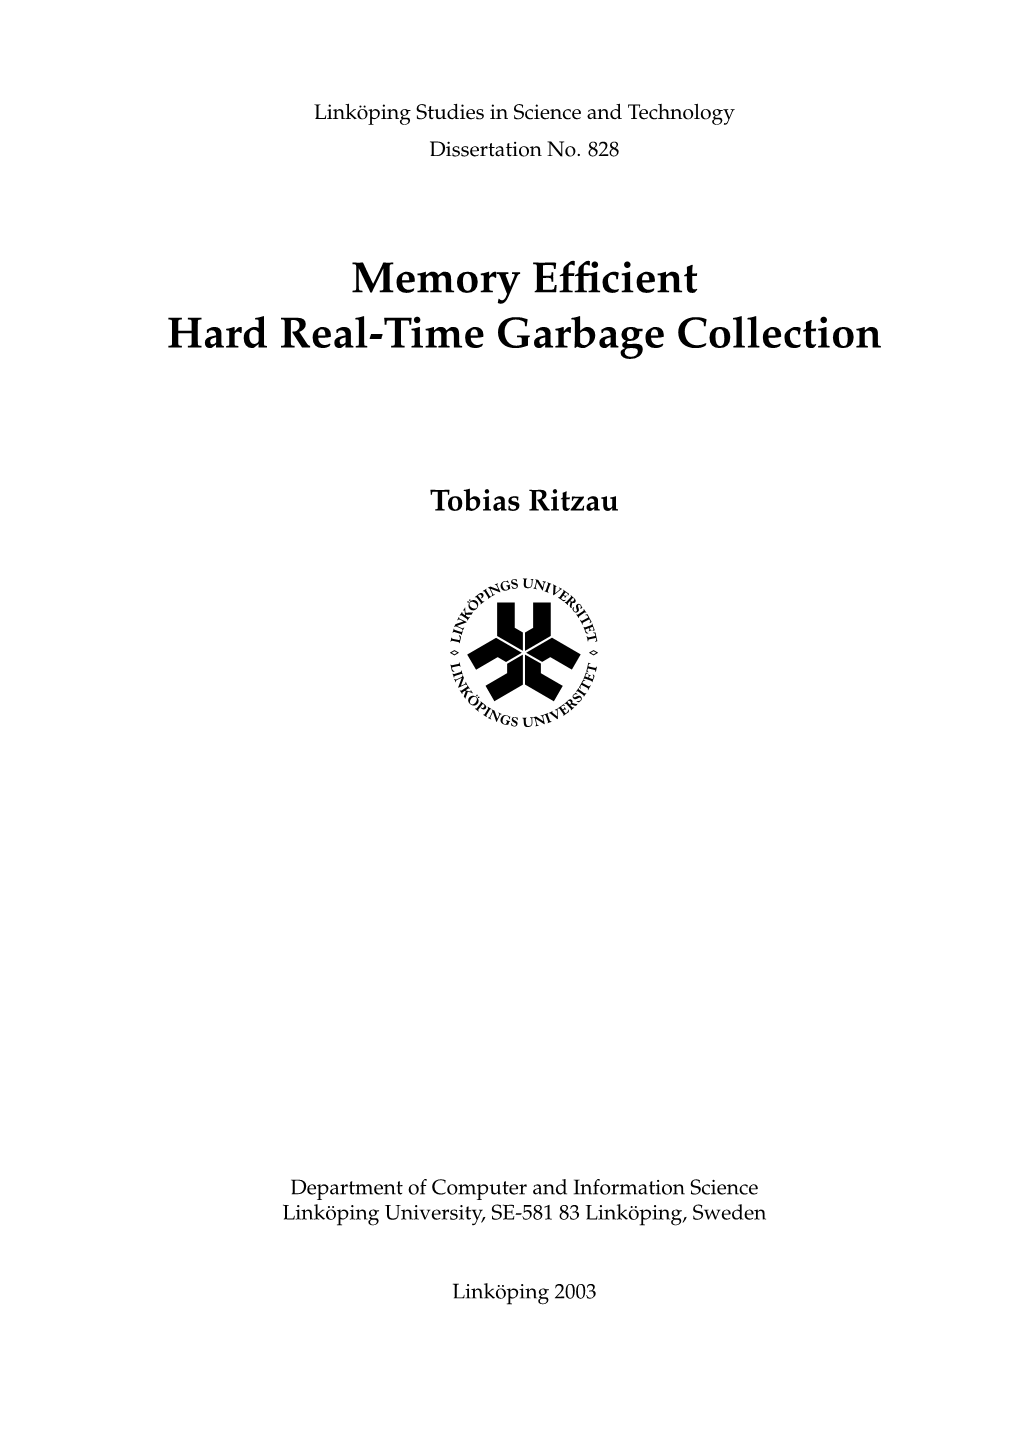 Memory Efficient Hard Real-Time Garbage Collection, 2003, ISBN 91-7373-666-X